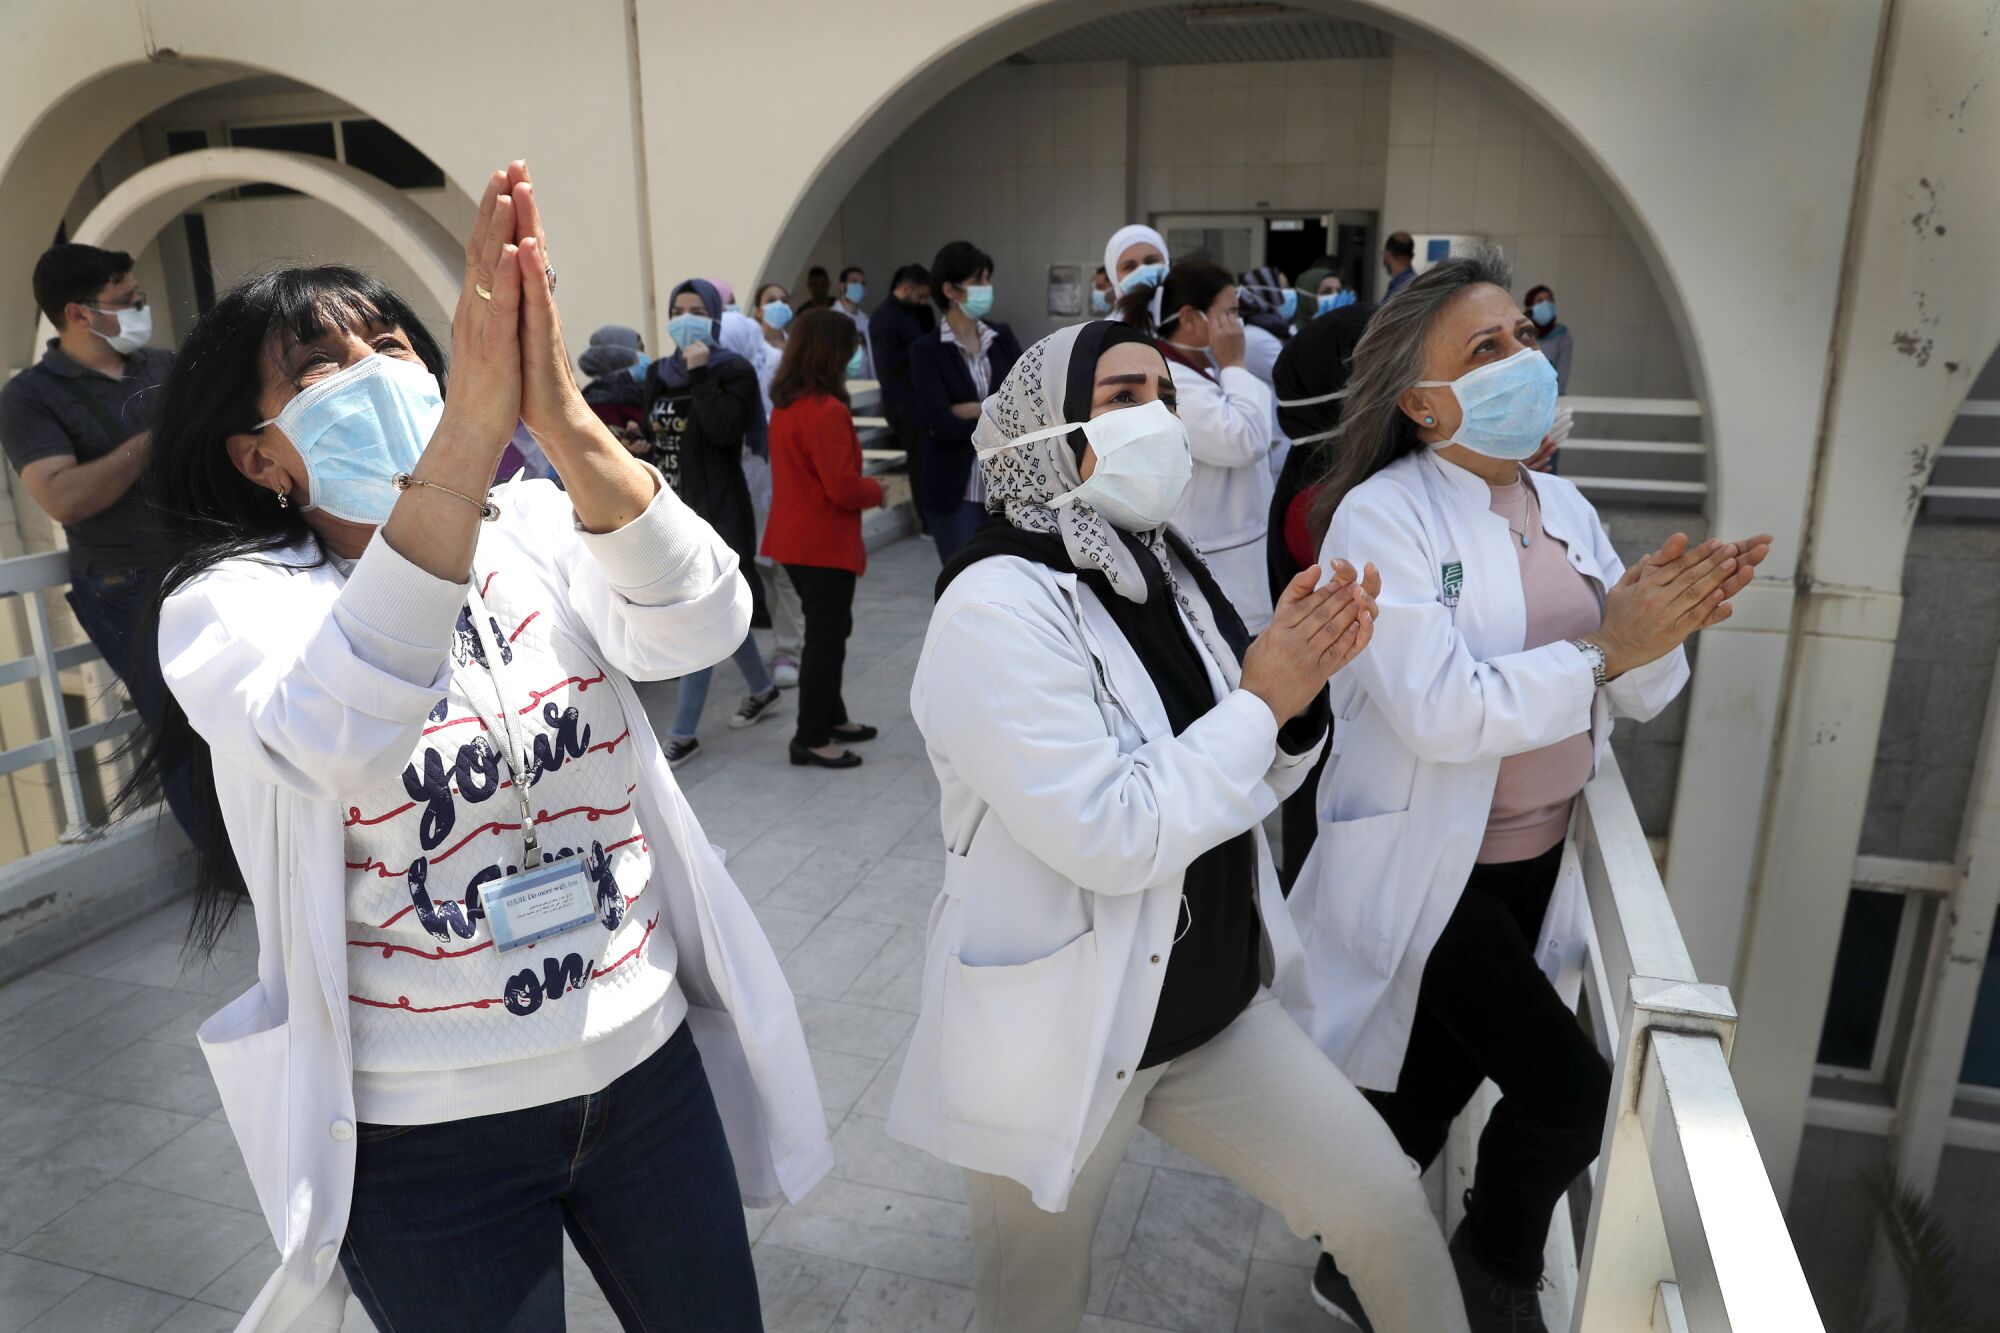 LEBANON: Nurses applaud a performance by musicians from Ahla Fawda, a nongovernmental organization, for staff and patients at Rafic Hariri University Hospital in Beirut on April 16.